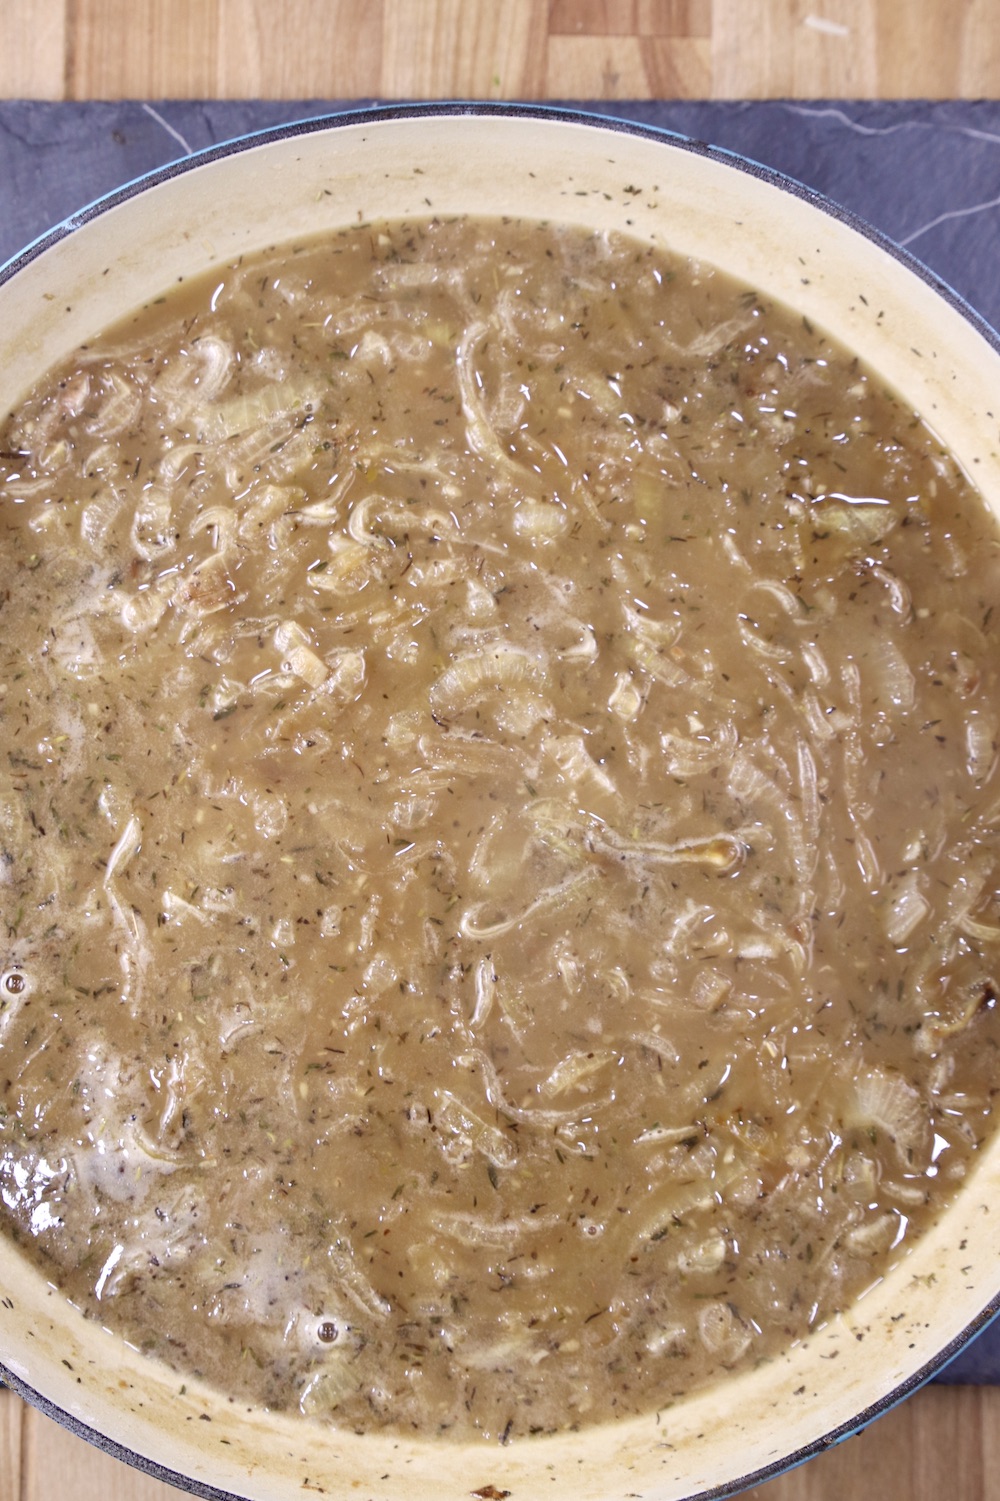 Pan of French Onion Soup